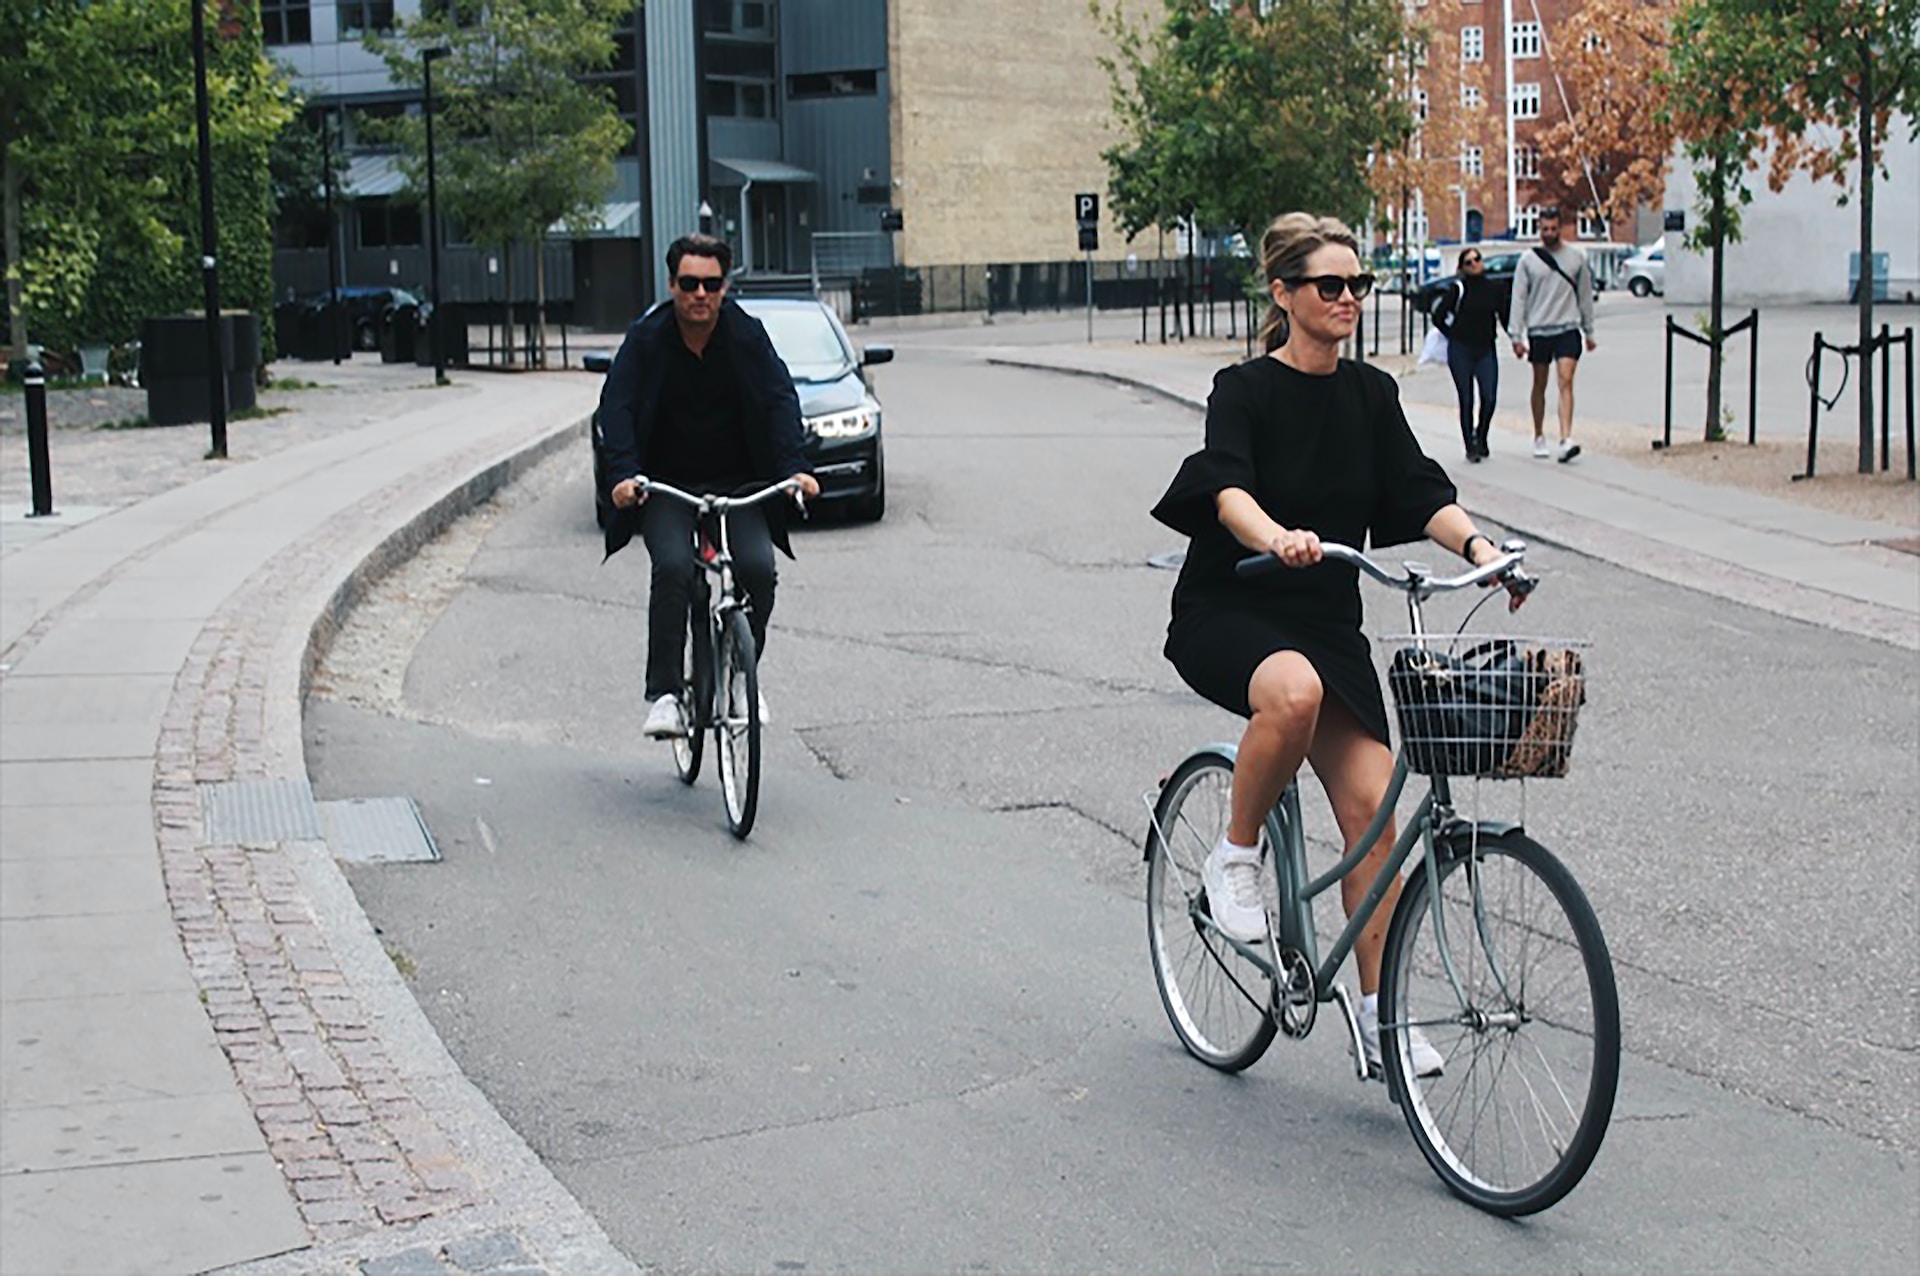 Two people riding bicycles in Copenhagen 